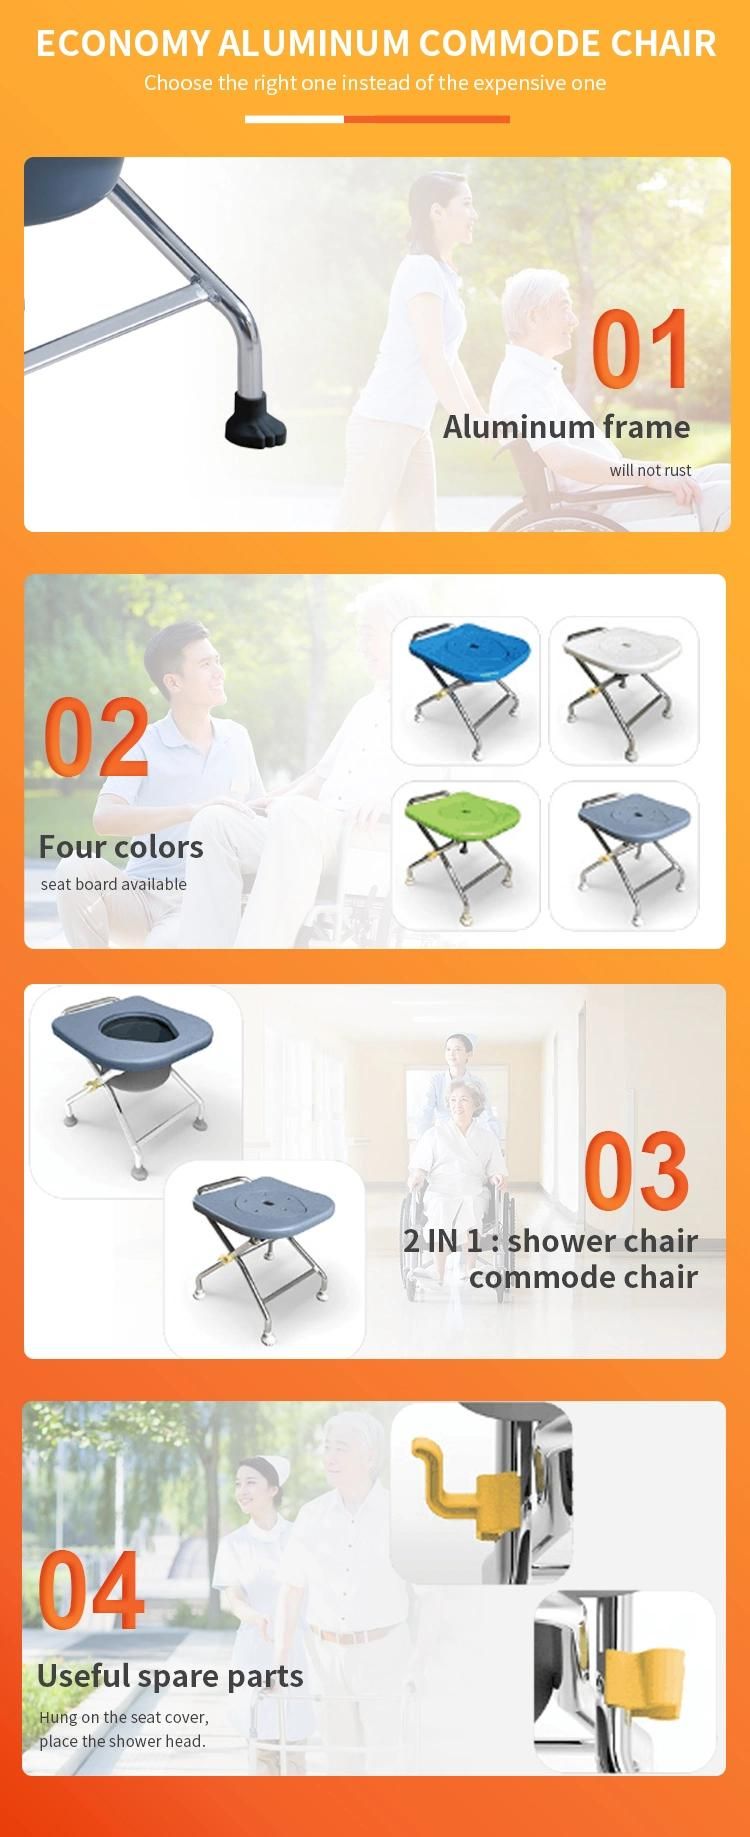 Commode Chair Foldable Toilet Seat Chair Standard Height Adjustable Multifunctional Shower Stool for Disabled Aluminum Folding